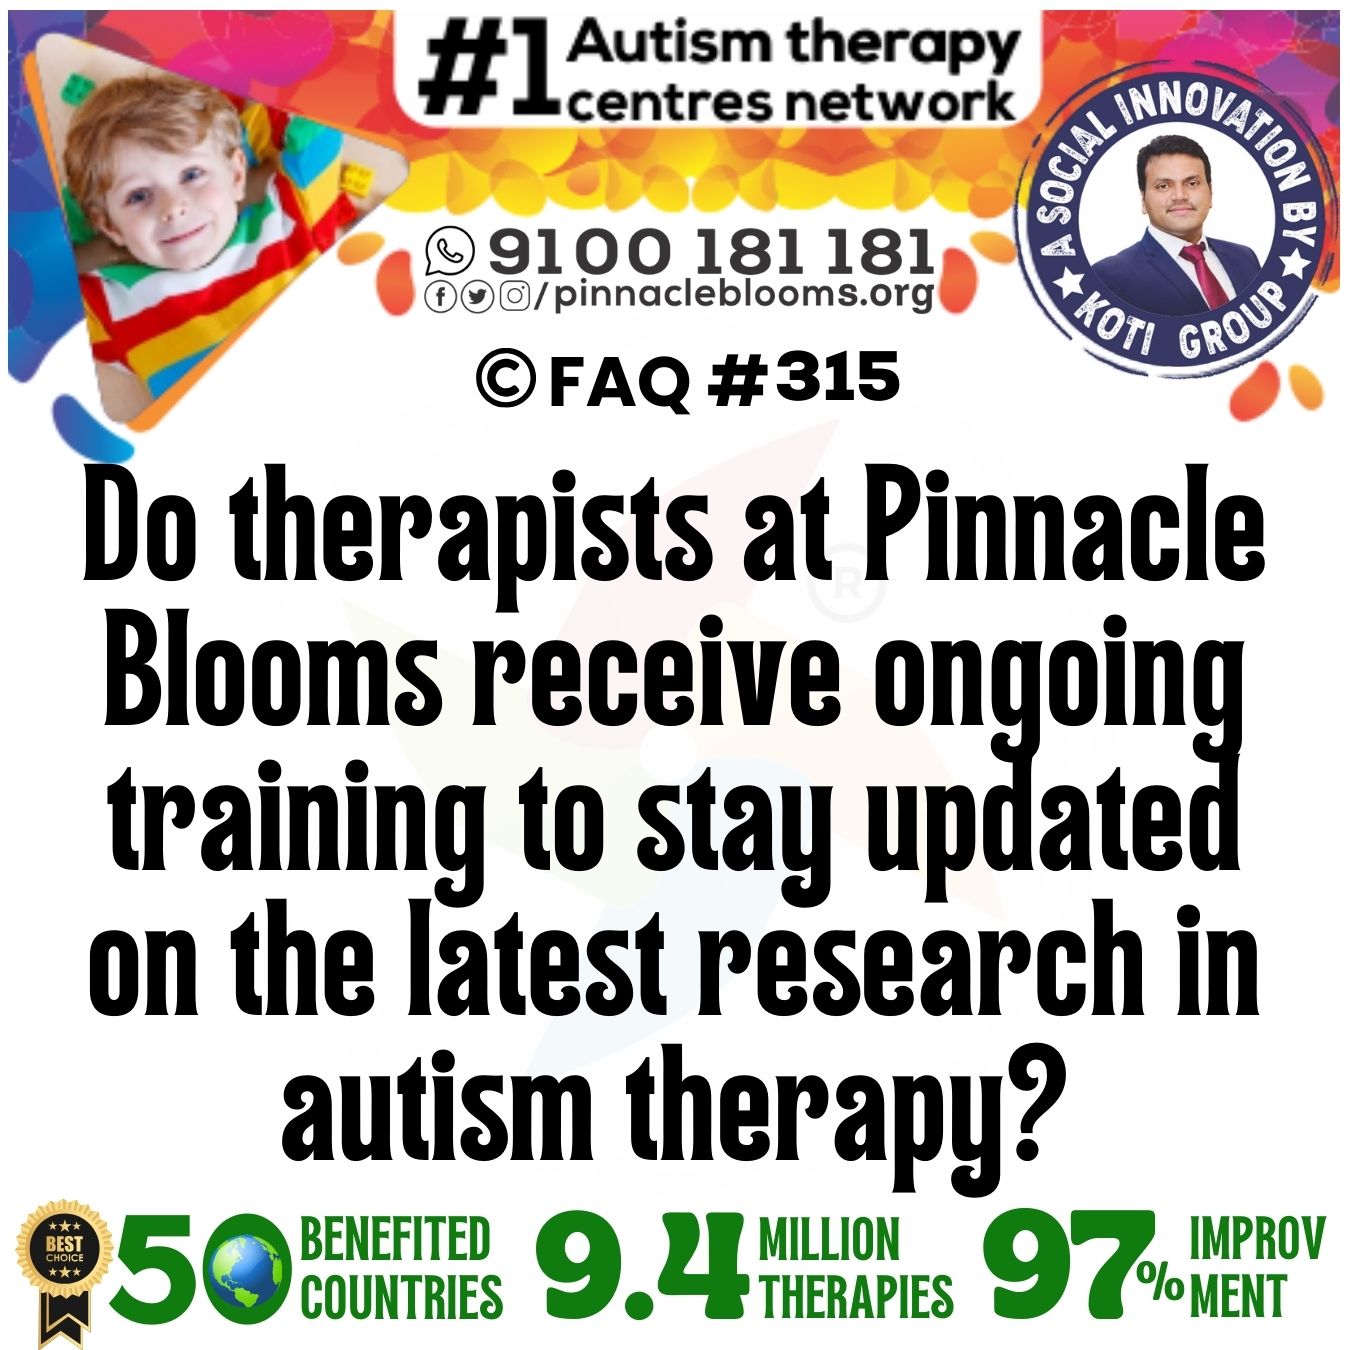 Do therapists at Pinnacle Blooms receive ongoing training to stay updated on the latest research in autism therapy?